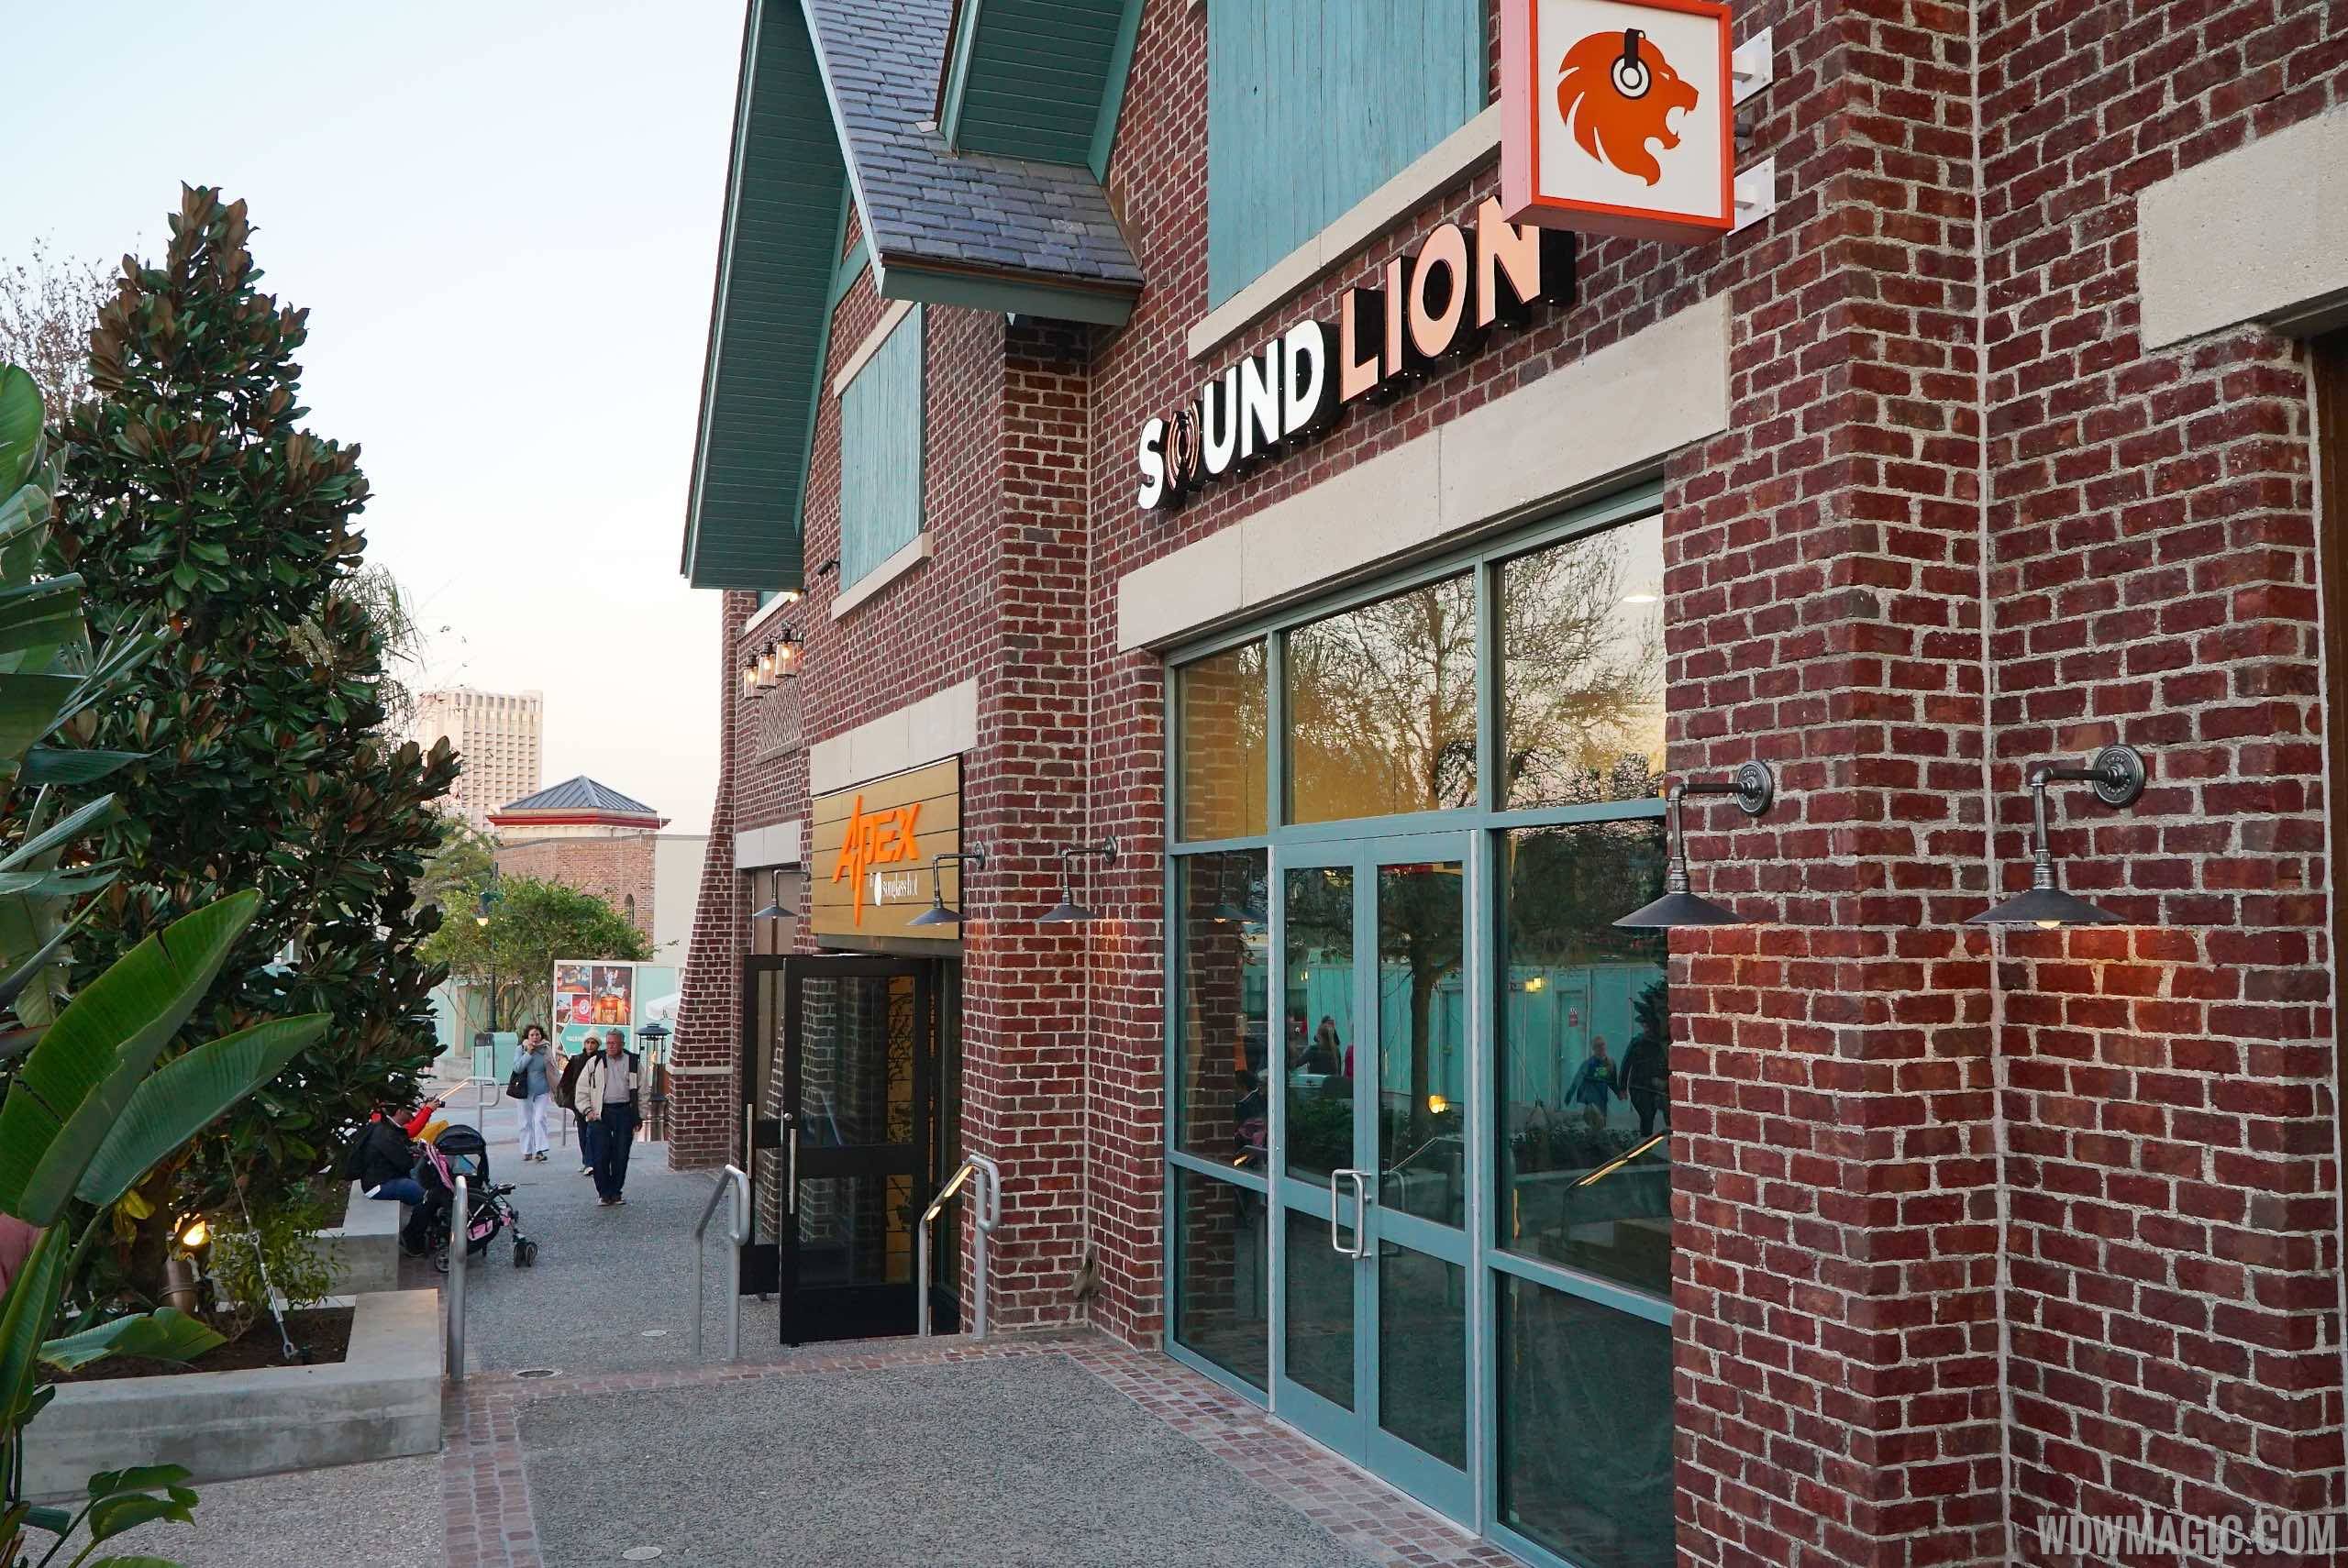 Sound Lion now closed at Disney Springs